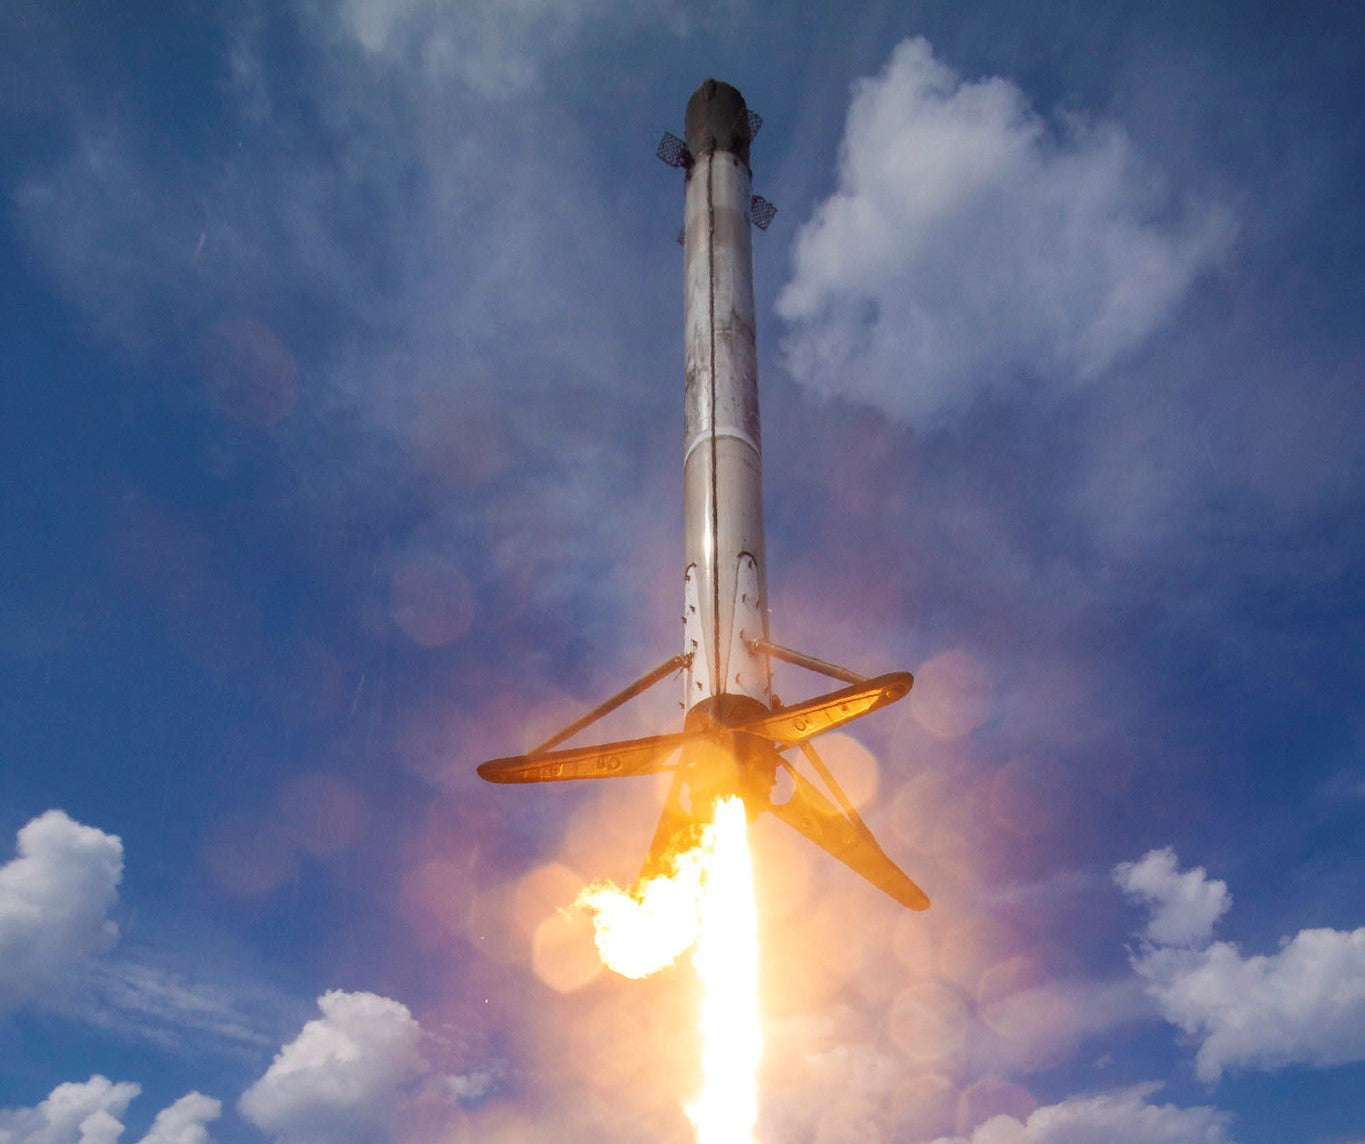 SpaceX's reusable Falcon 9 rockets will save the U.S. Space Force $53 million